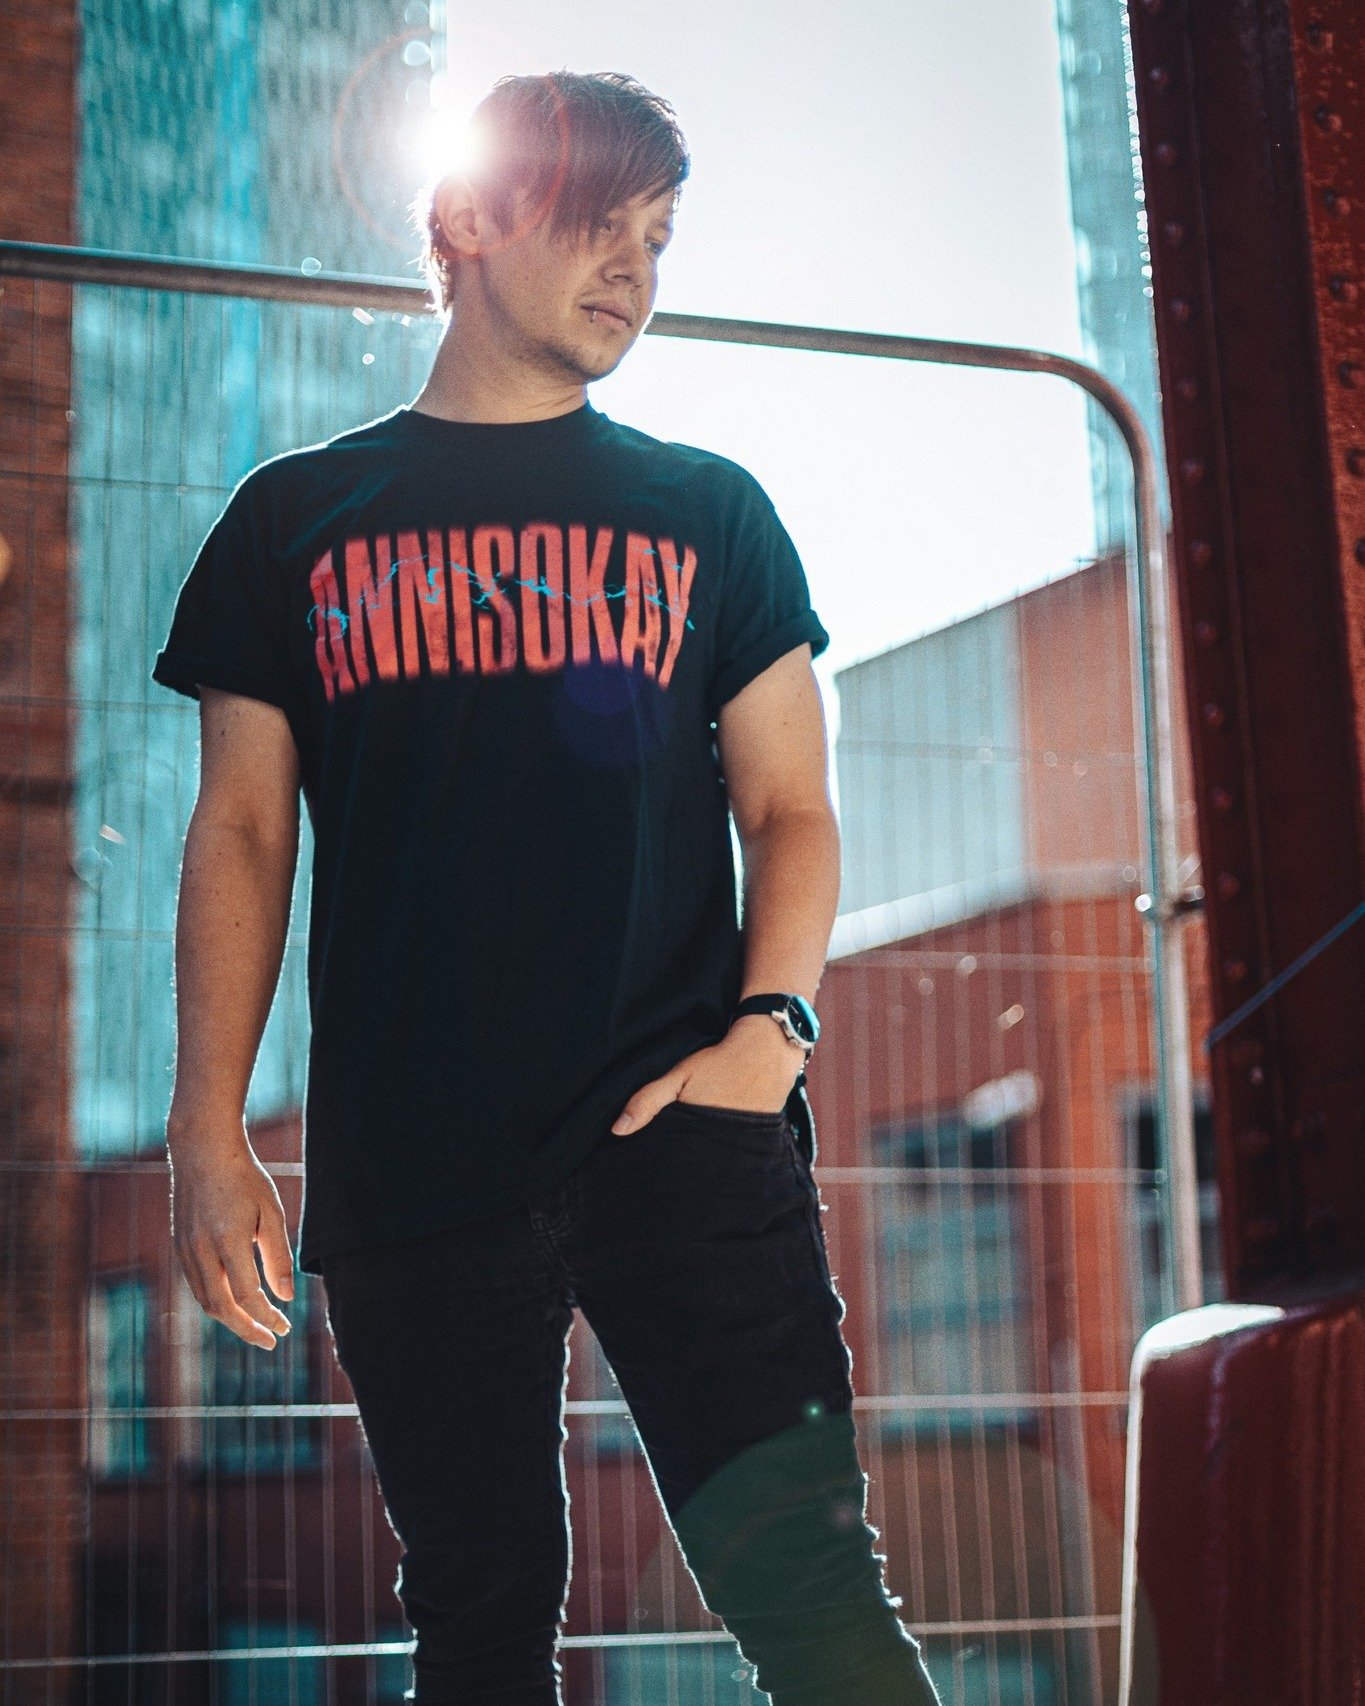 Have you got some Annisokay merch yet? 👕 We modeled back on our headline tour in Manchester to show you some of our designs. 📸 You can purchase the merch at @impericonde. We love seeing you guys wear it! 💙

Pictures by @lukesmediacorner 

#merchan